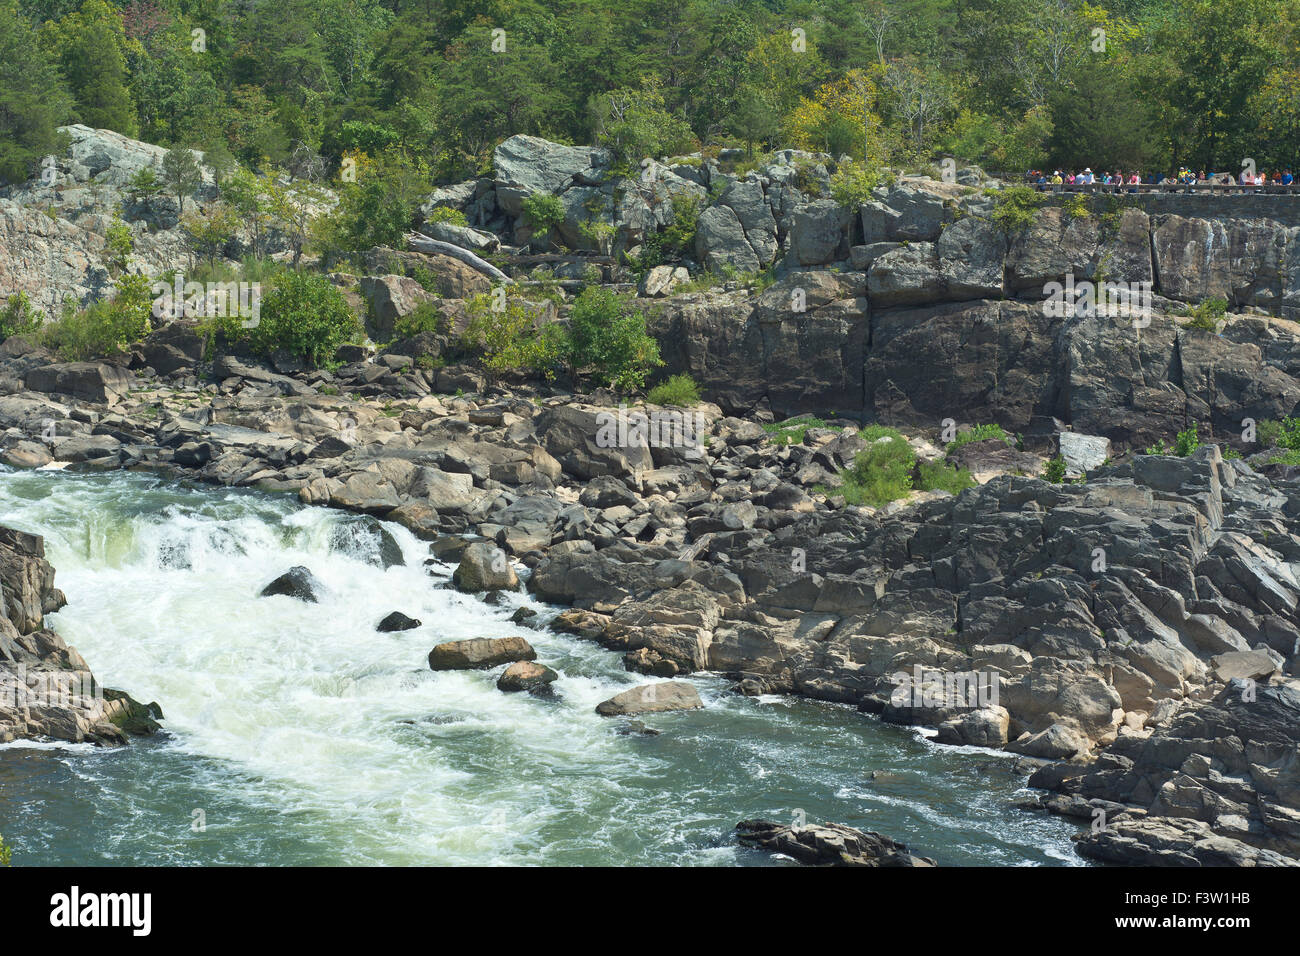 Great Falls Park on the Potomac River in Virginia Stock Photo